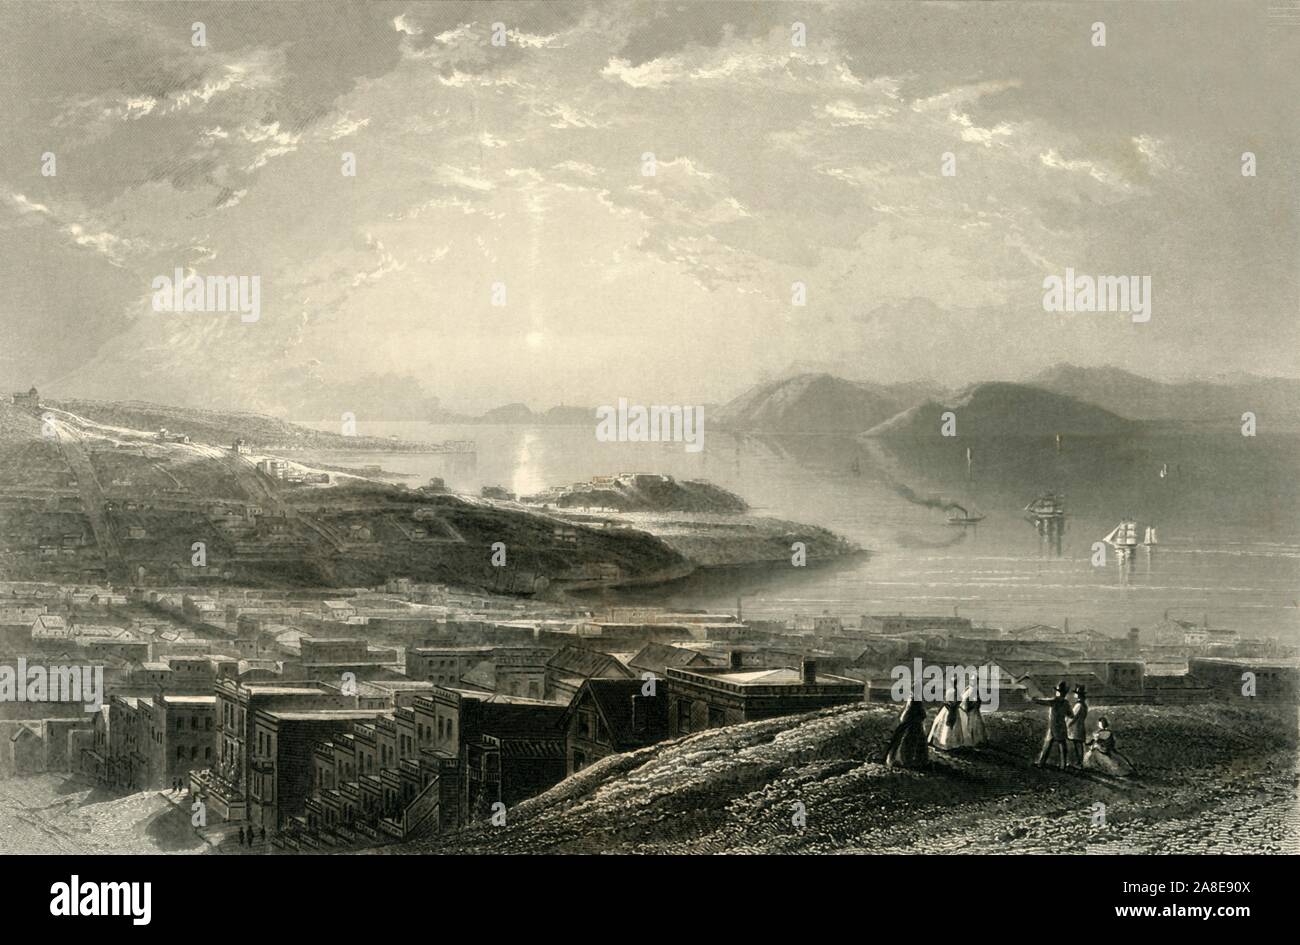 'Golden Gate (From Telegraph Hill)', 1872. View of the strait that connects San Francisco Bay to the Pacific Ocean, California, USA. 'The view opens, and the splendid straits called the Golden Gate appear. Through them we can see the island-rock of Alcatraz, with its fortifications gleaming in the distance...Little craft and big craft, steamers from the ocean, tugs, and every variety of floating thing, are spread upon the gleaming waters, whose green waves dash into white foam upon the three islands ahead. Beyond the city, one can catch momentary glimpses of shipping...'. From &quot;Picturesqu Stock Photo